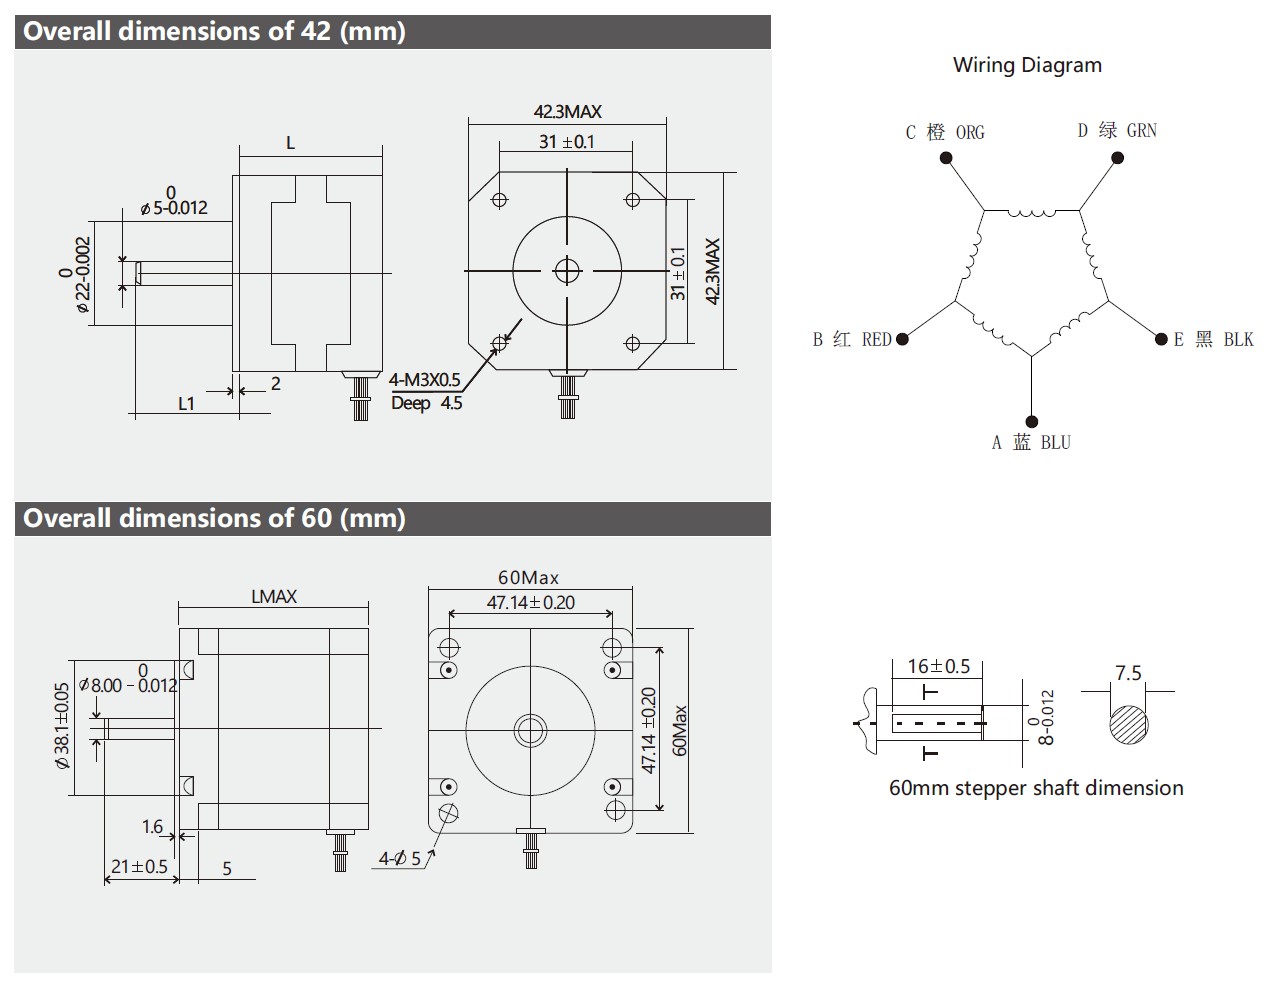 DimeDimensions of 5-phase stepper motor 42&60seriesnsions of 5-phase stepper motor 42&60series